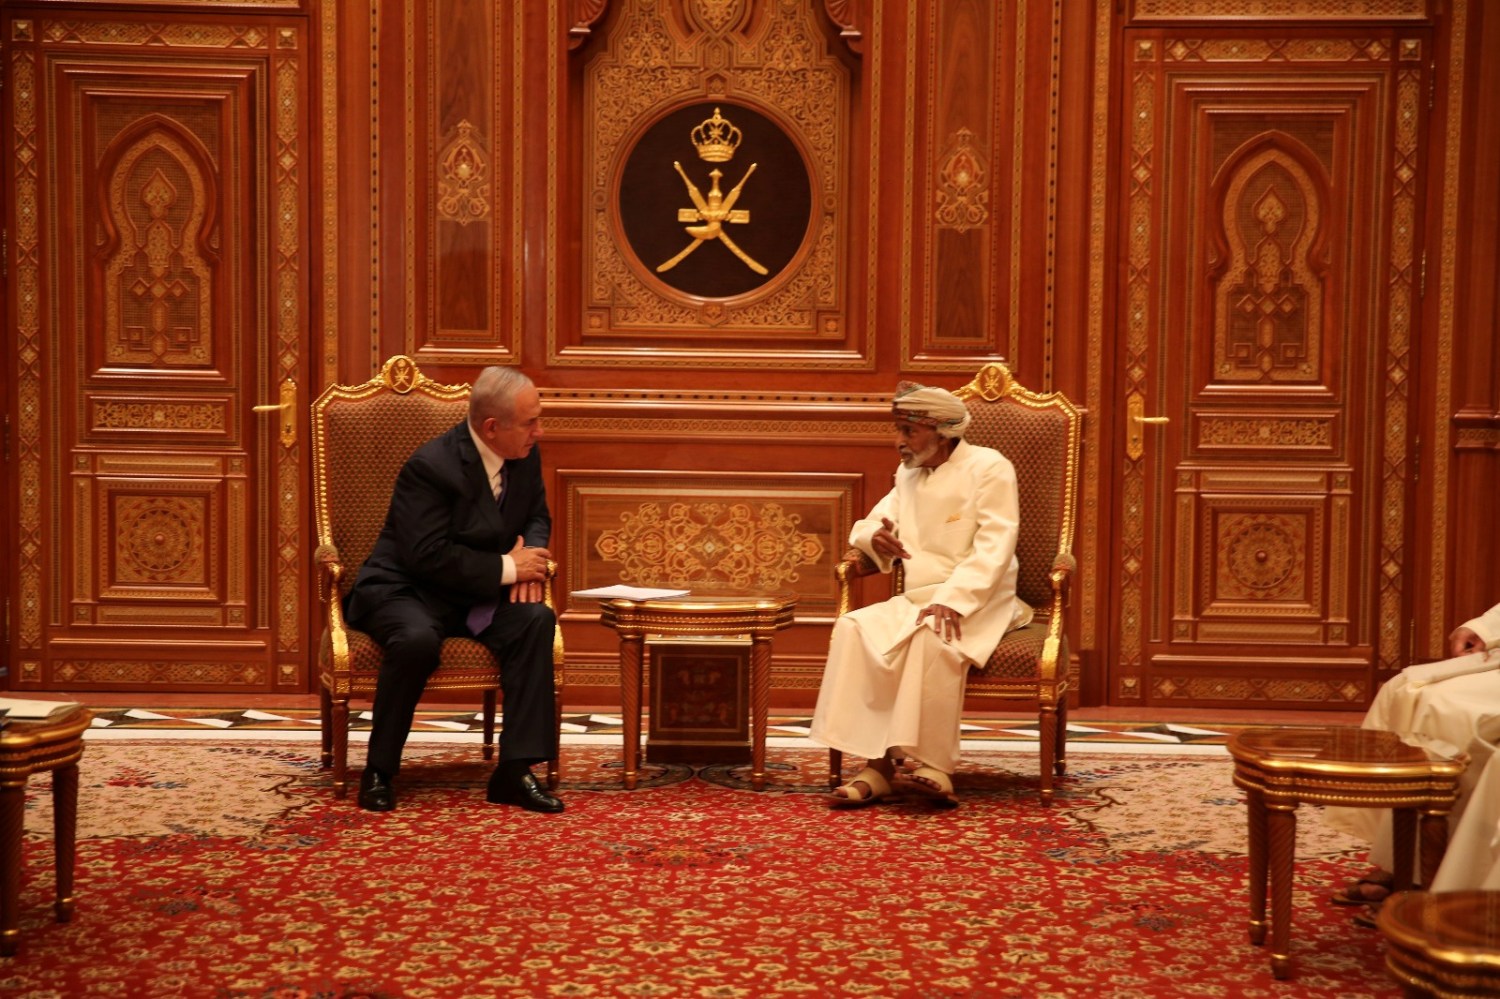 Israel Prime Minister Office Israeli Prime minister Benjamin Netanyahu meets Sultan Qaboos bin Said in this undated handout provided by the Israel Prime Minister Office, in Oman. Israel GPO/Handout via REUTERS ATTENTION EDITORS - THIS PICTURE WAS PROVIDED BY A THIRD PARTY. - RC191FF37EB0